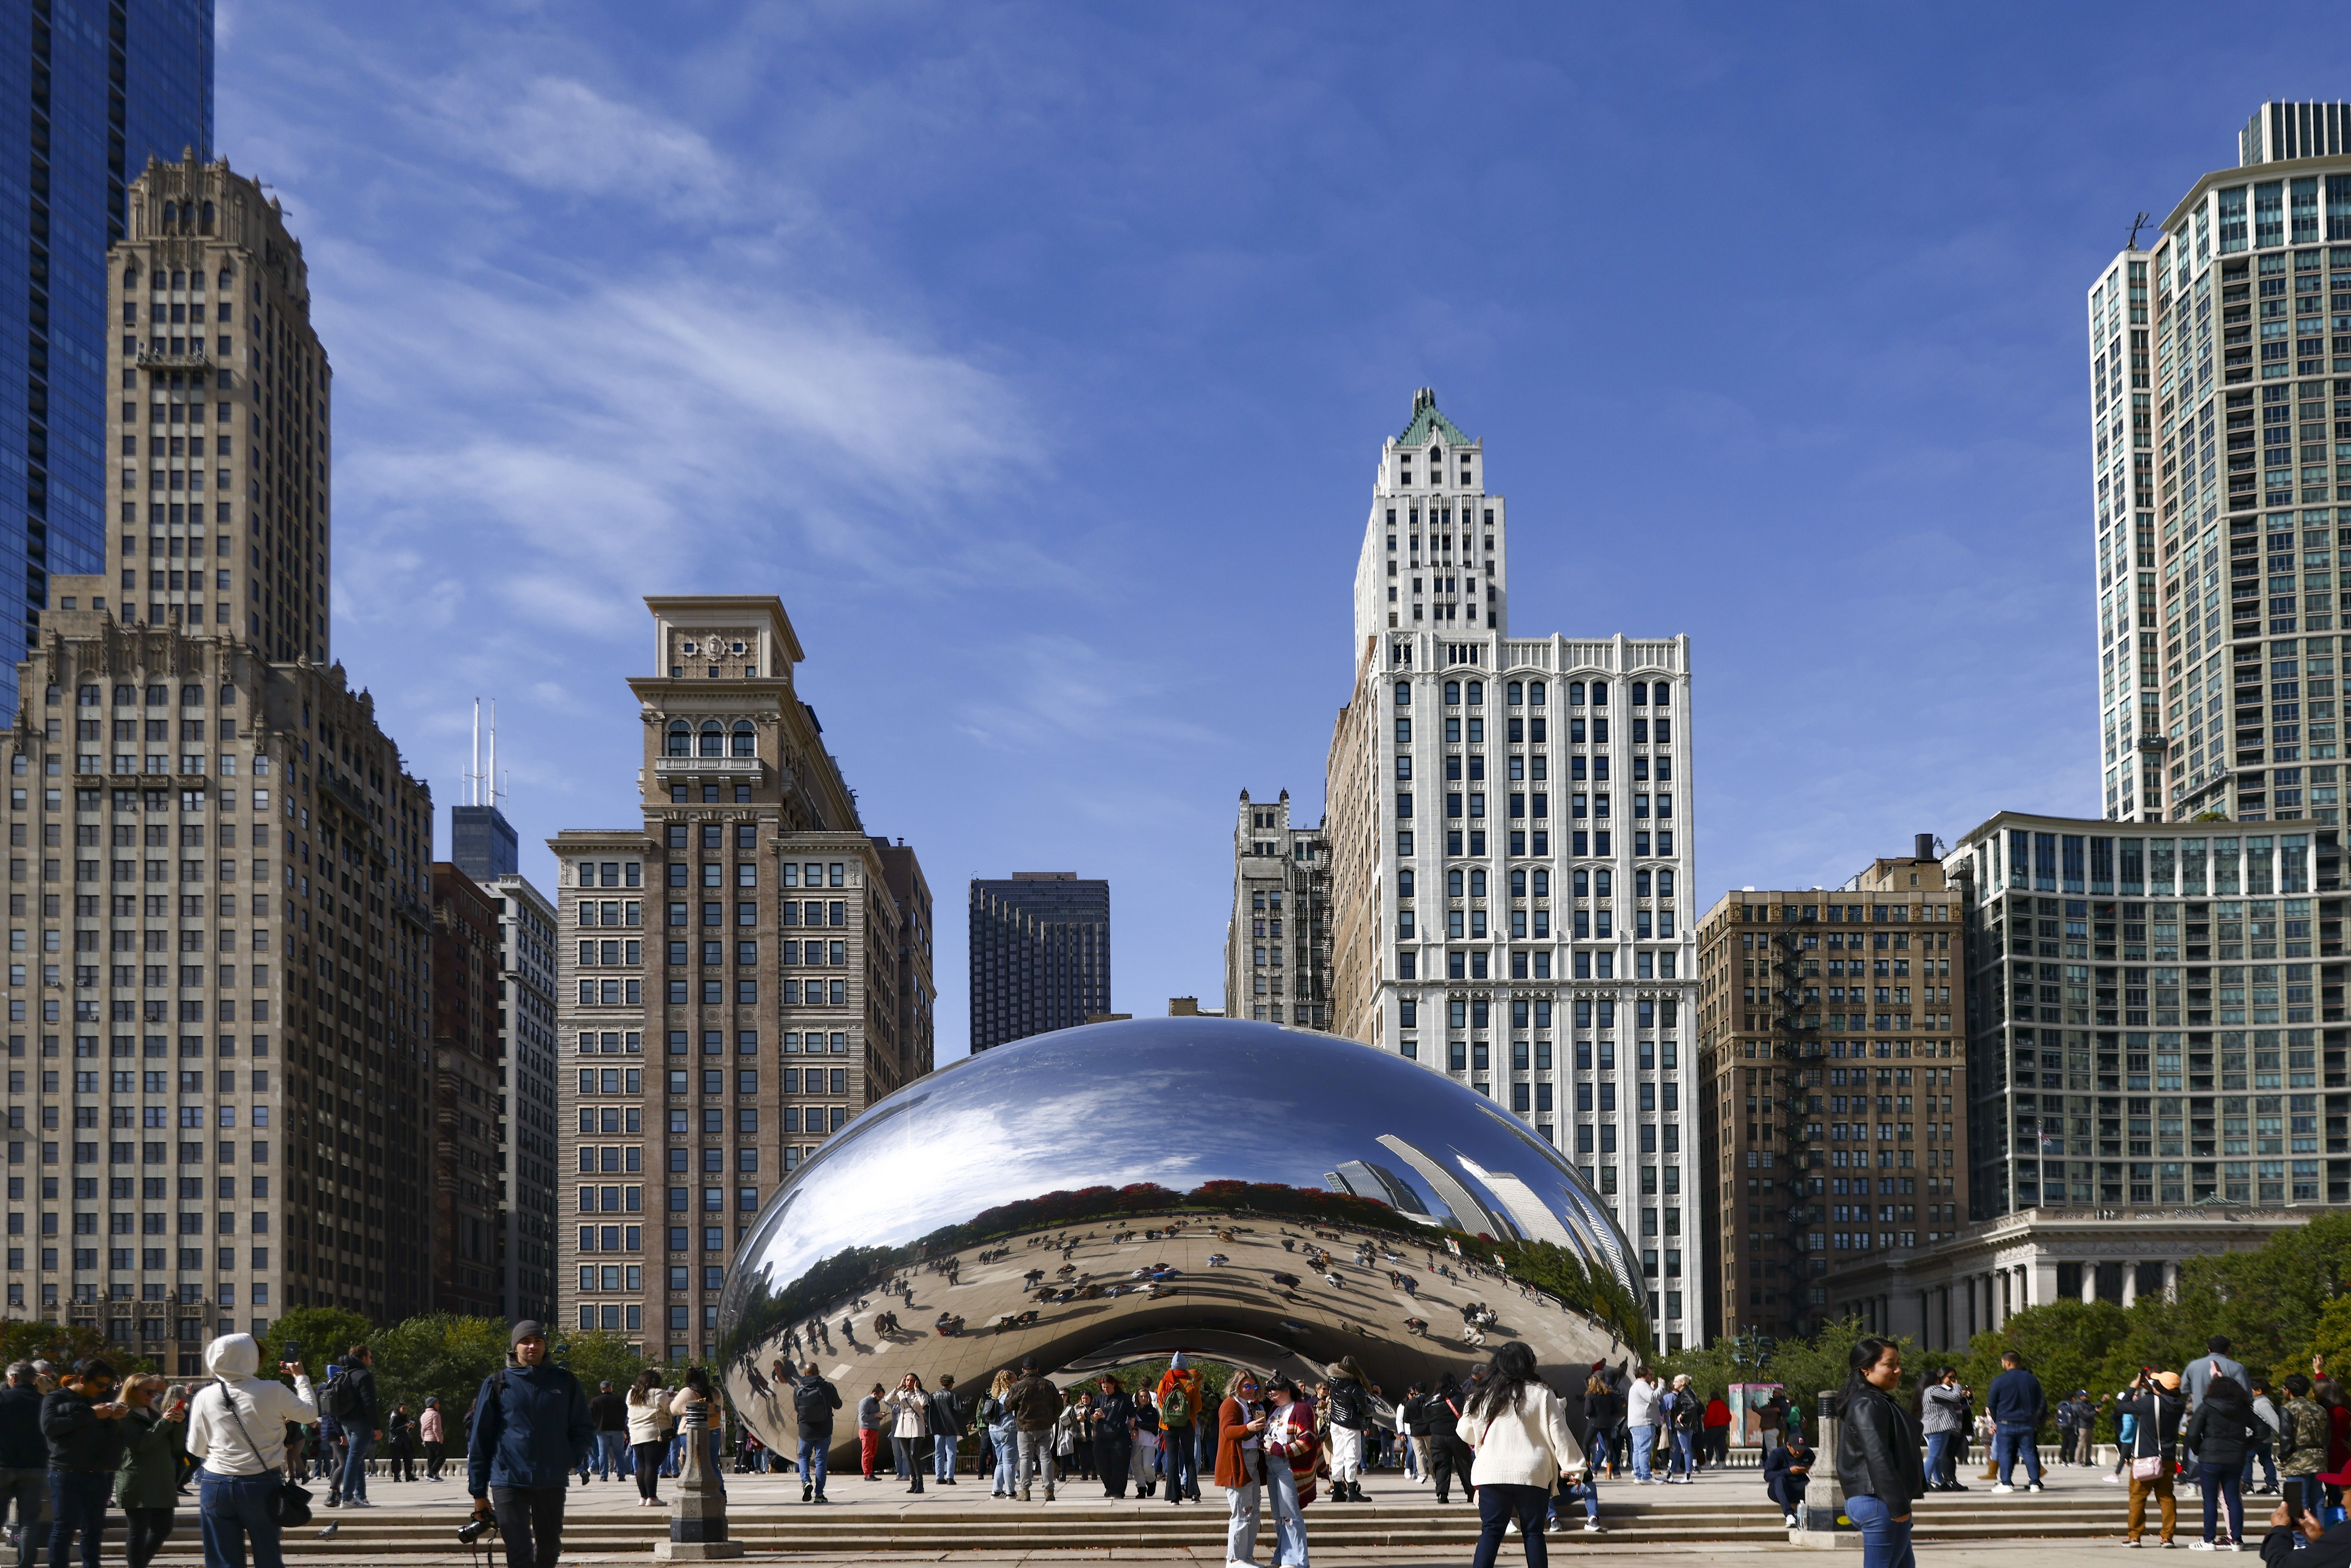 The "Cloud Gate" sculpture, also known as The Bean, is surrounded by tourists with Chicago's skyline in the background.